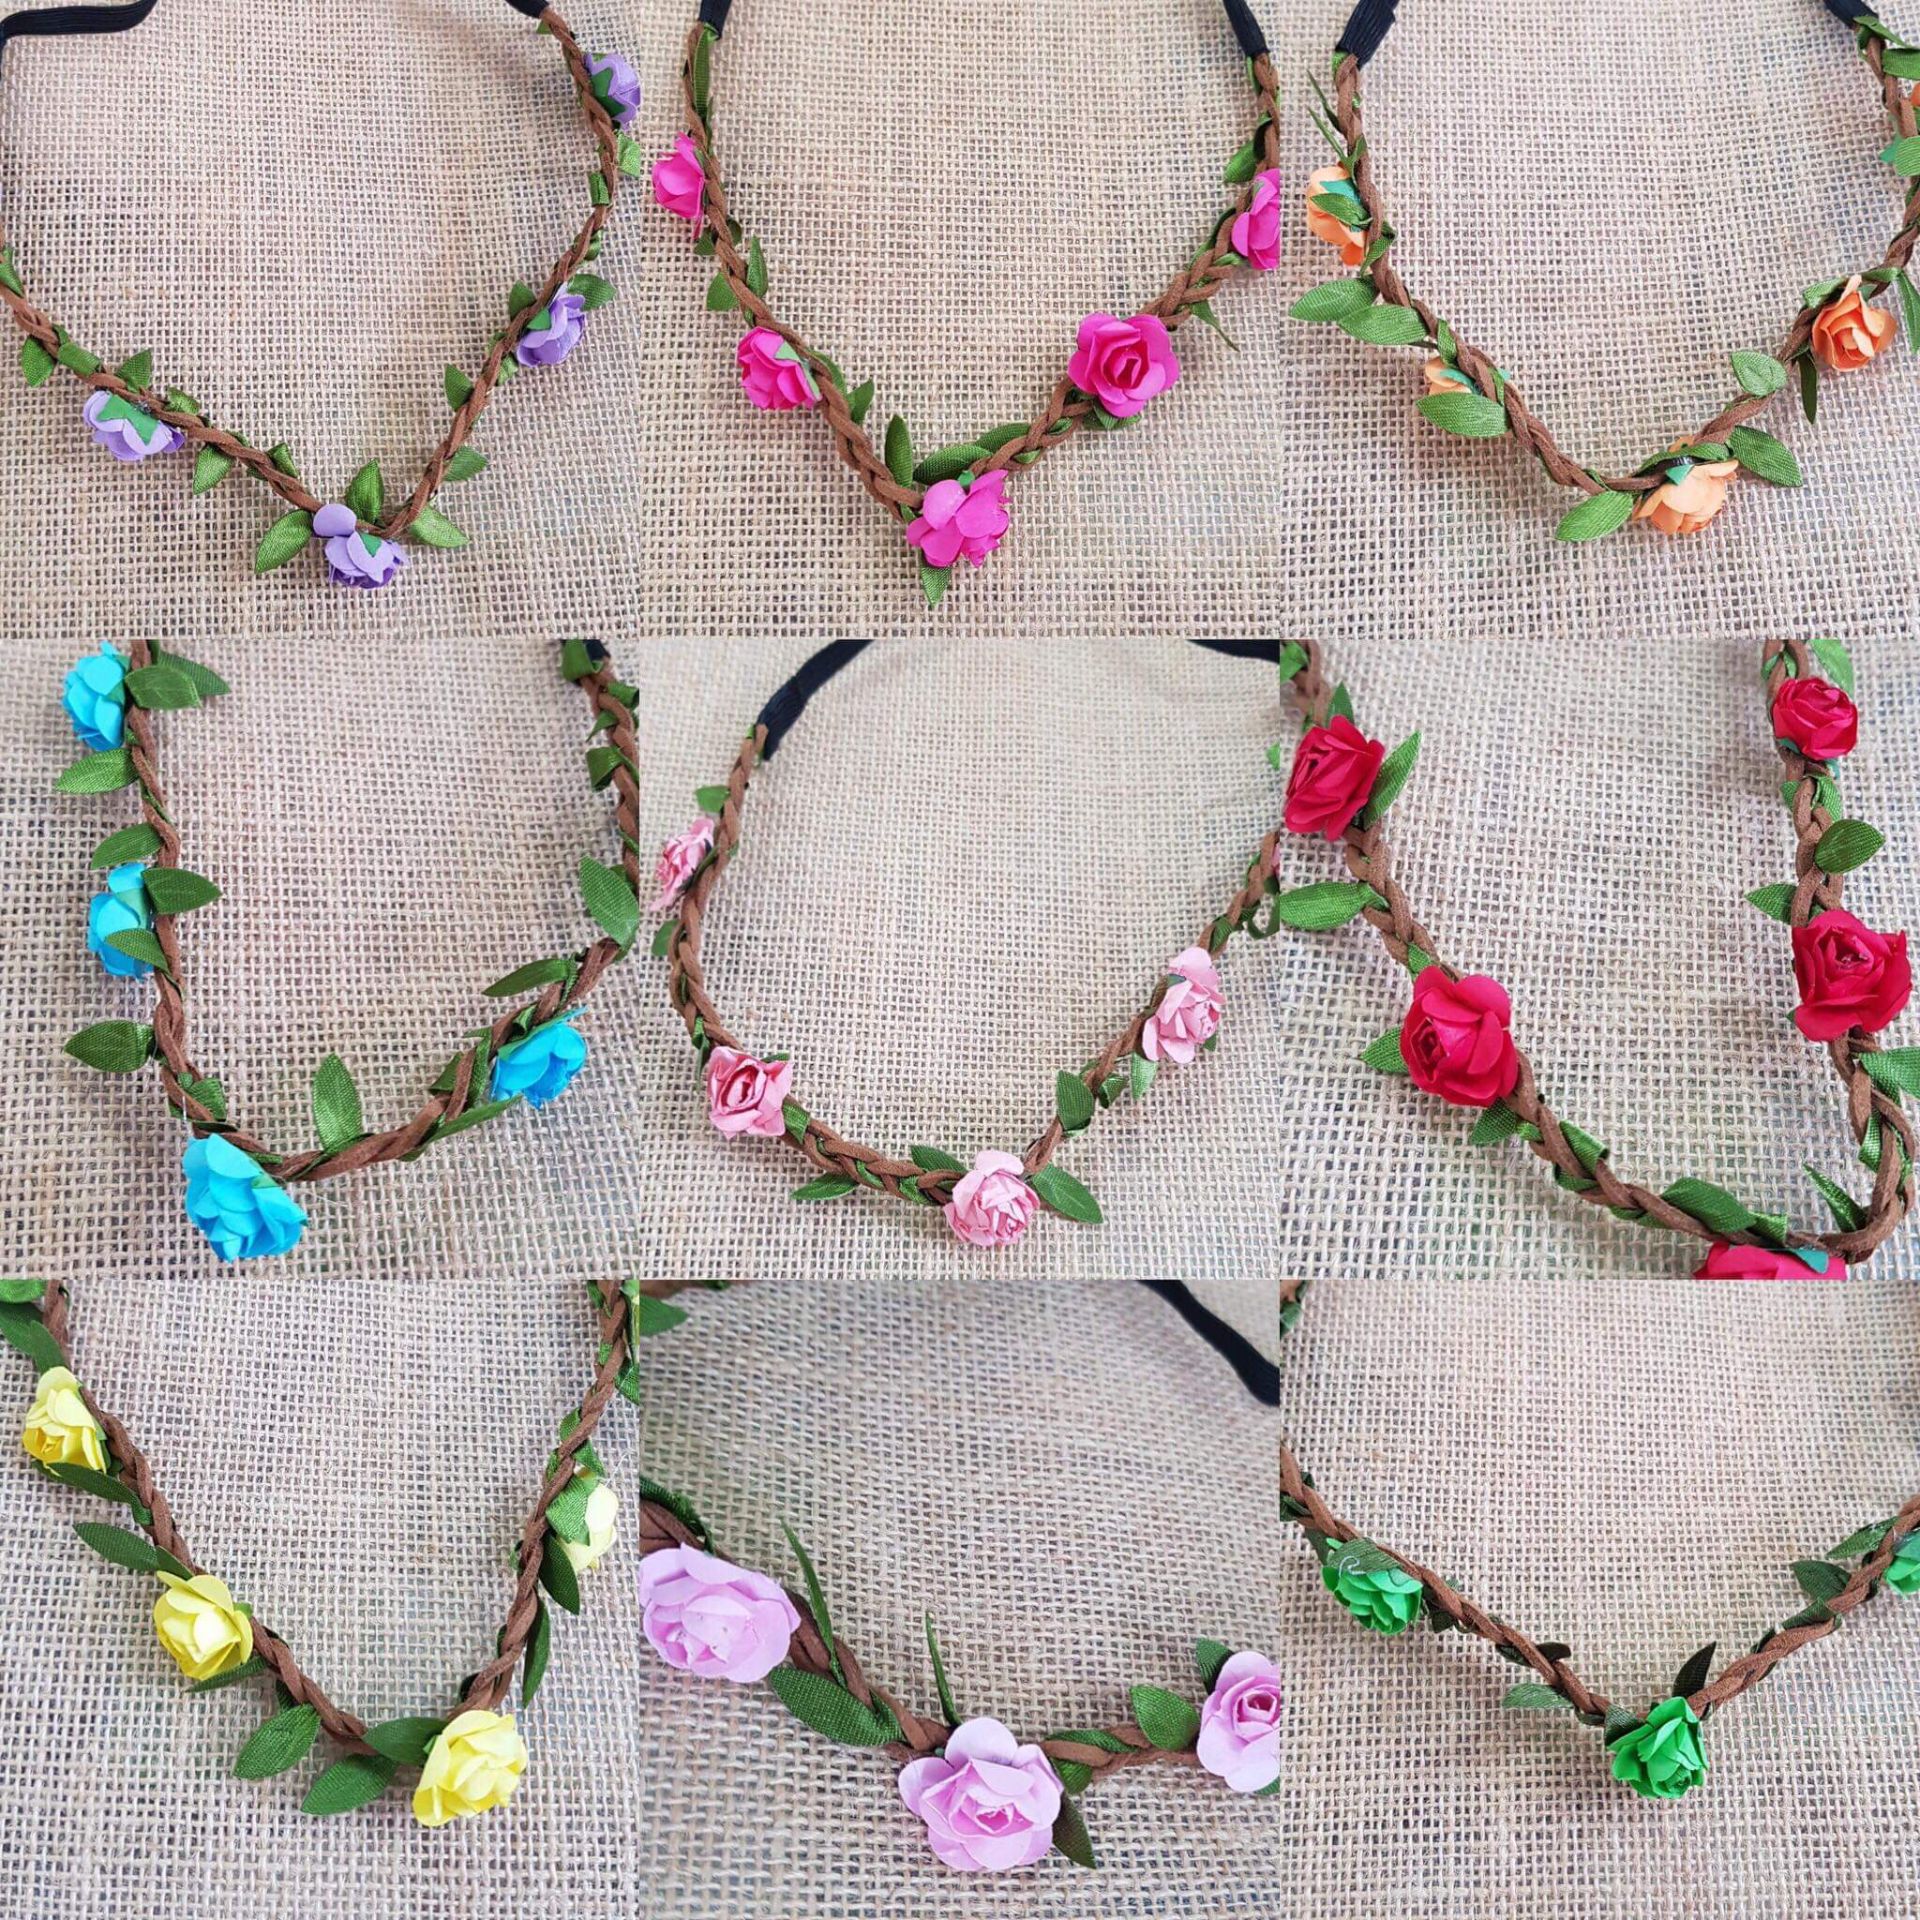 Leather Band Floral Headband x 50 - Image 2 of 3